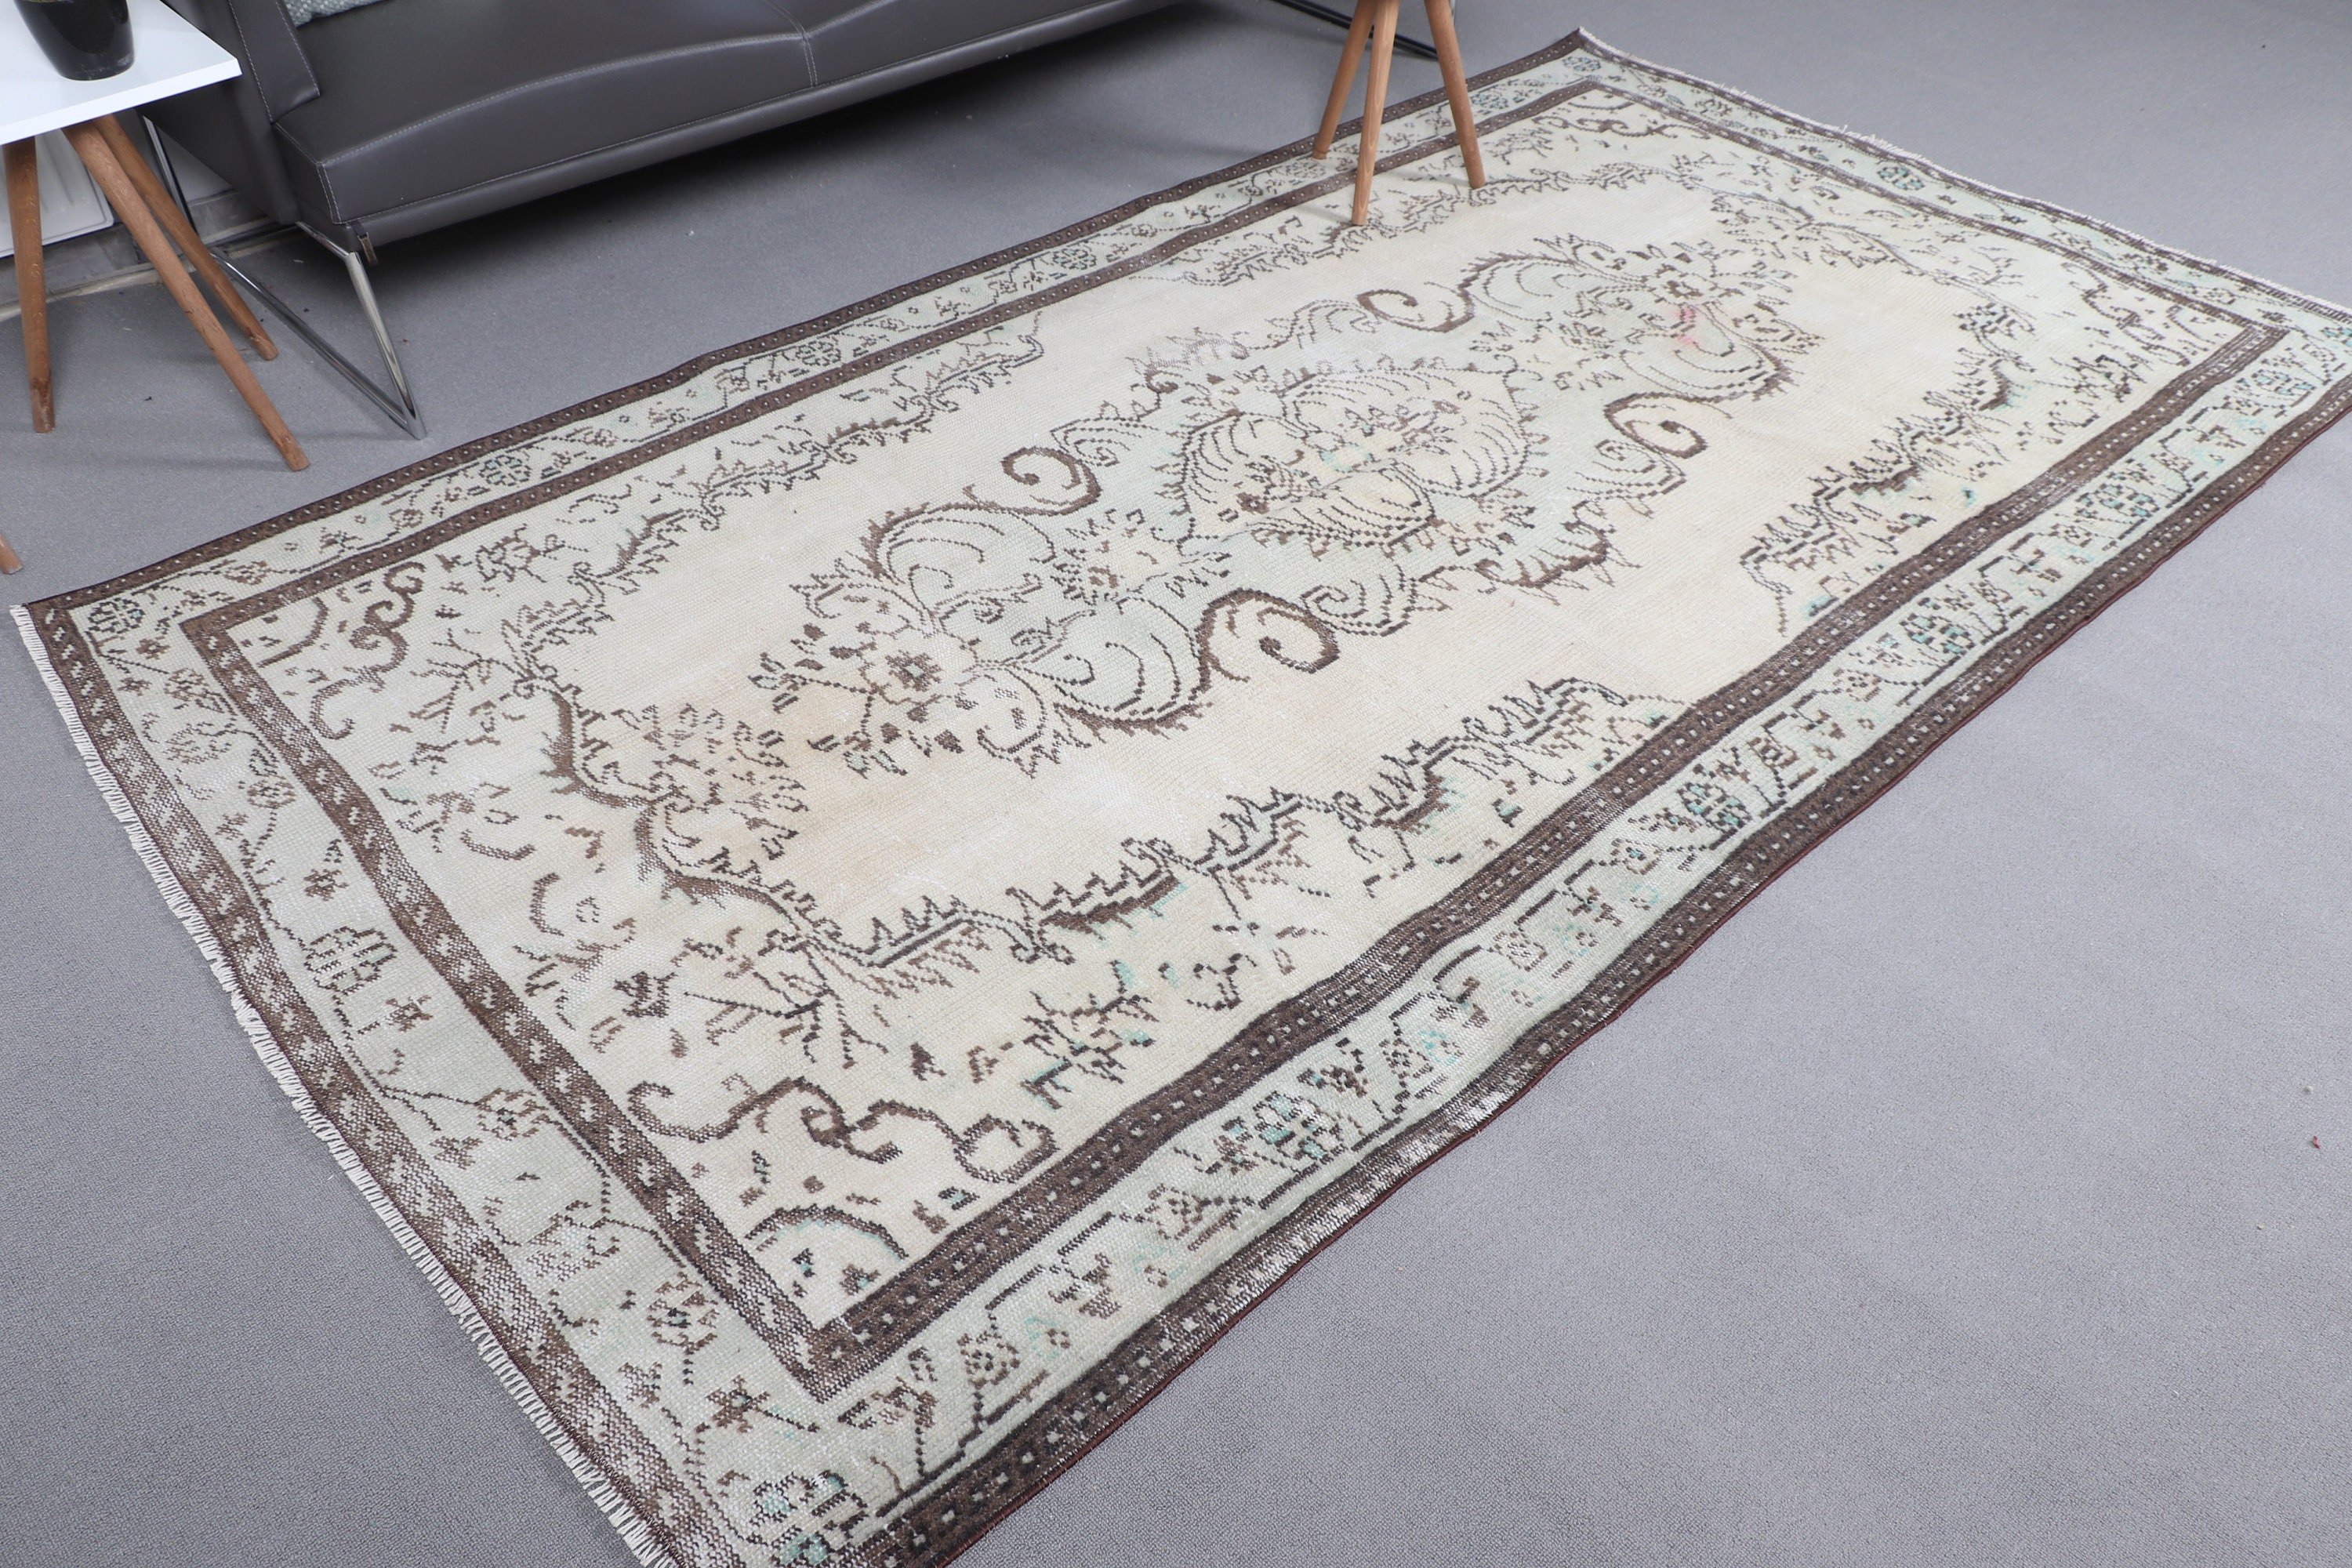 Vintage Rugs, Dining Room Rugs, Salon Rug, Antique Rug, 5.2x9 ft Large Rug, Cool Rugs, Rugs for Salon, Turkish Rugs, Beige Home Decor Rug